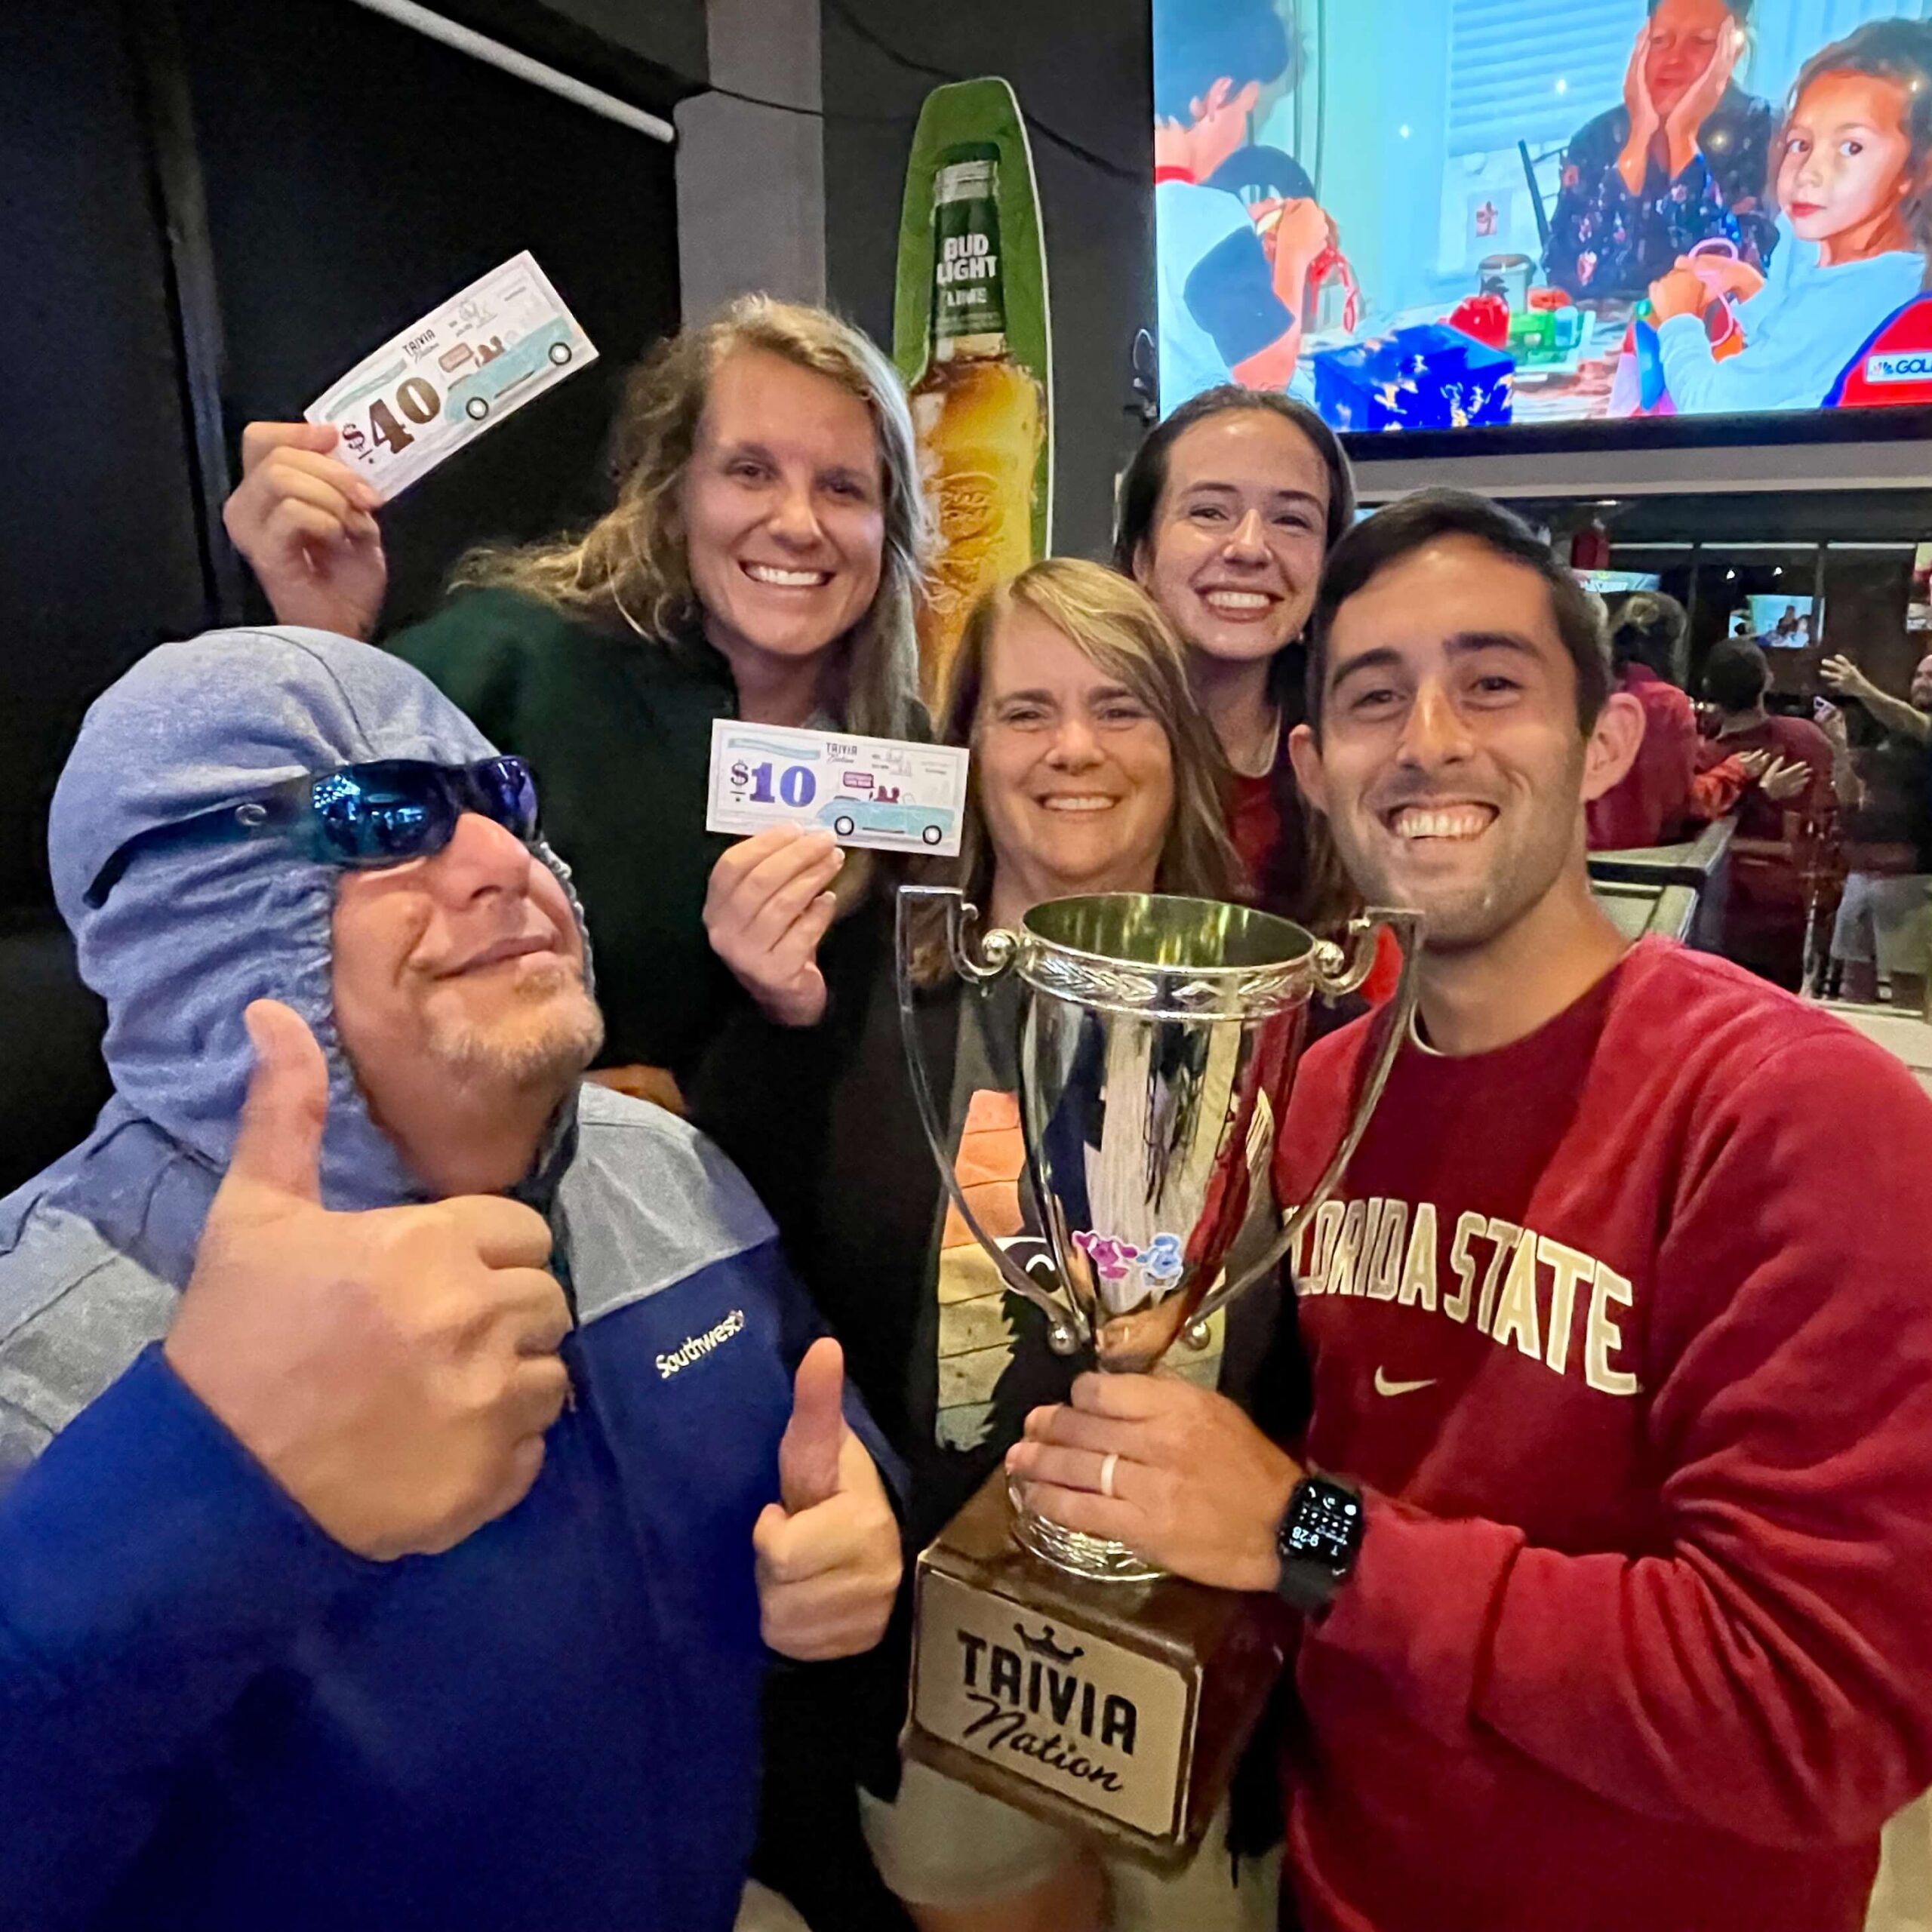 The Twisted Birch Sports Bar & Grill Rockledge FL 32955 trivia night: group of adults having fun with one man having a hoodie tied over his eyes wearing sunglasses and another man smiling and holding up a trophy